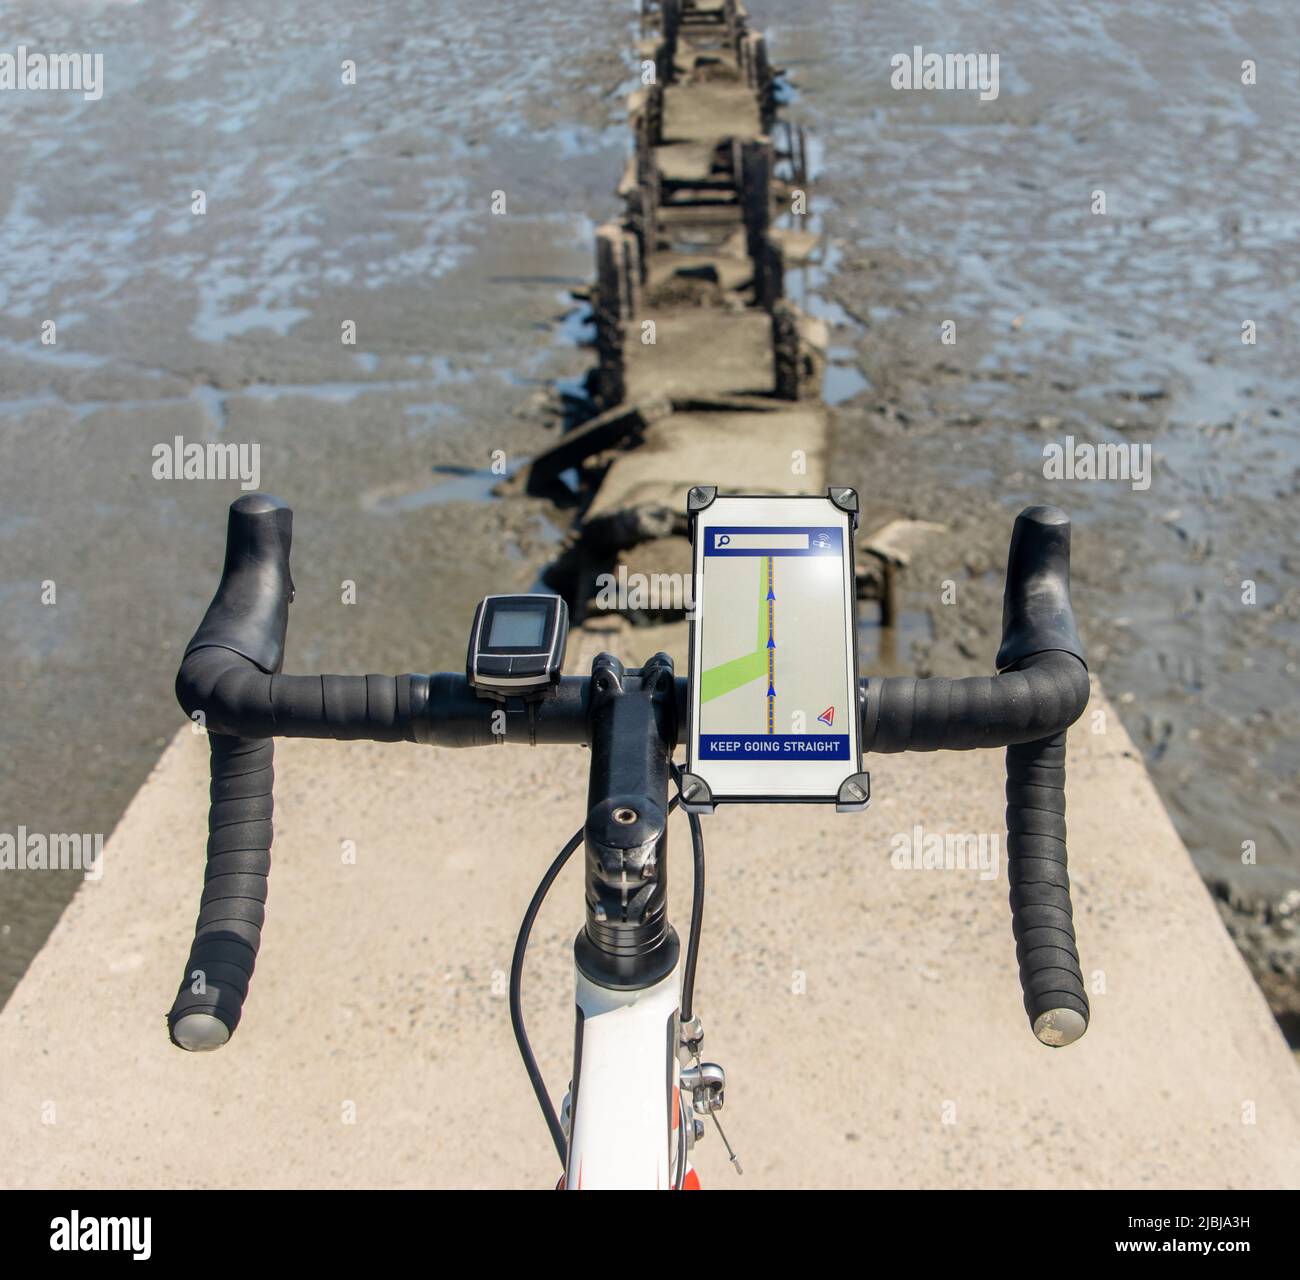 The handlebars of bicycle with incorrect navigation standing on the edge of a demolished way Stock Photo